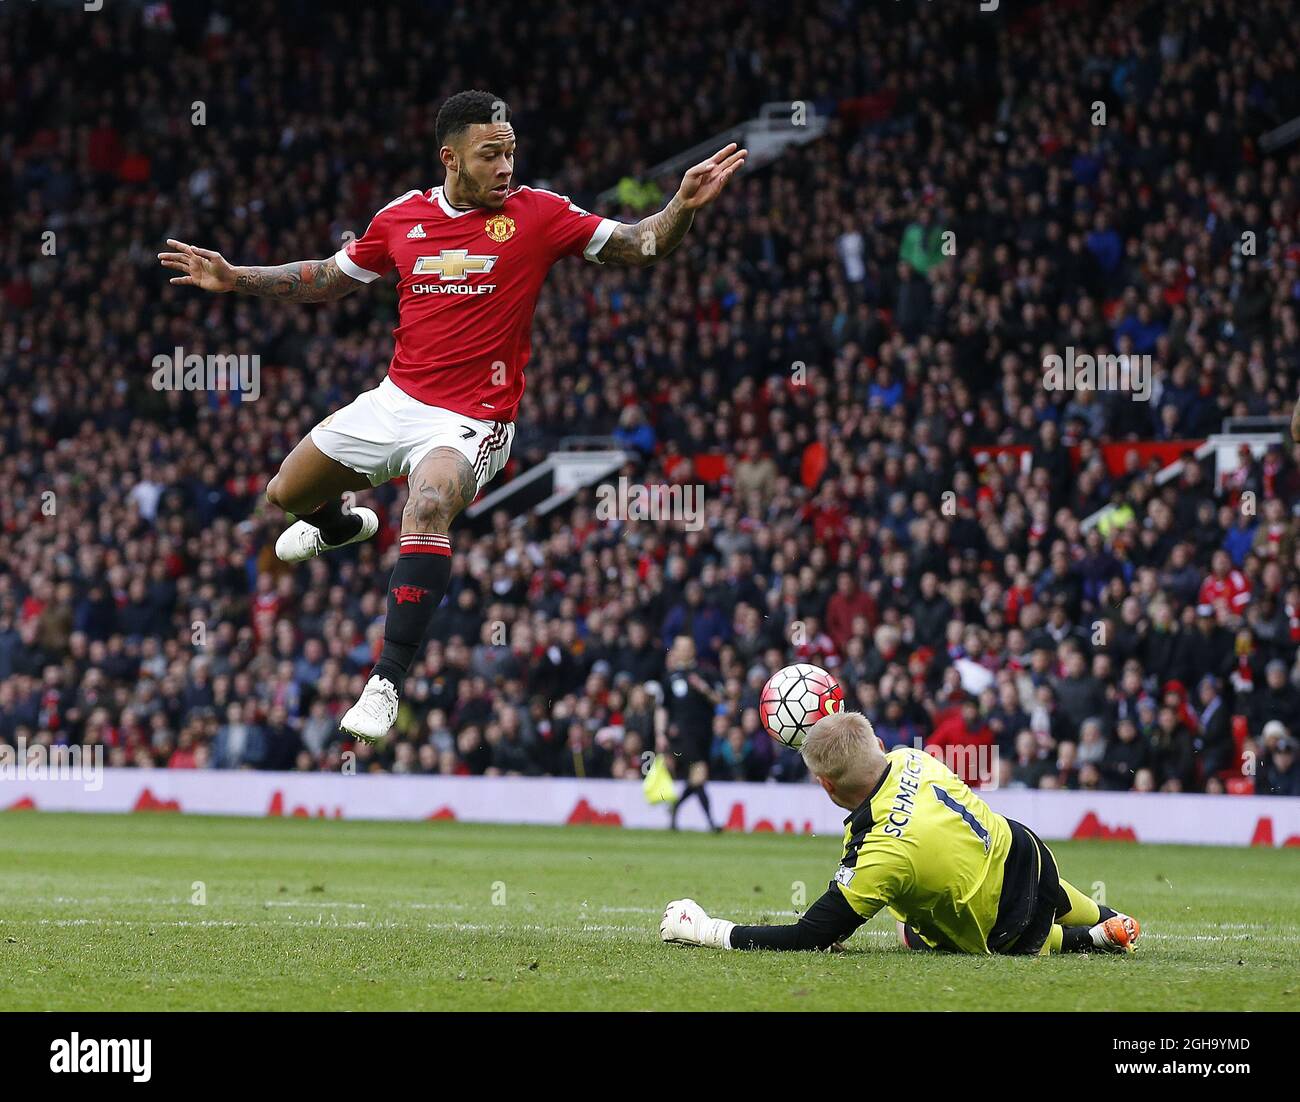 Kasper Schmeichel of Leicester City saves at the feet of Memphis Depay of Manchester United in the last minutes of the game during the Barclays Premier League match at the Old Trafford Stadium. Photo credit should read: Simon Bellis/Sportimage via PA Images                                - Newcastle Utd vs Tottenham - St James' Park Stadium - Newcastle Upon Tyne - England - 19th April 2015 - Picture Phil Oldham/Sportimage Stock Photo